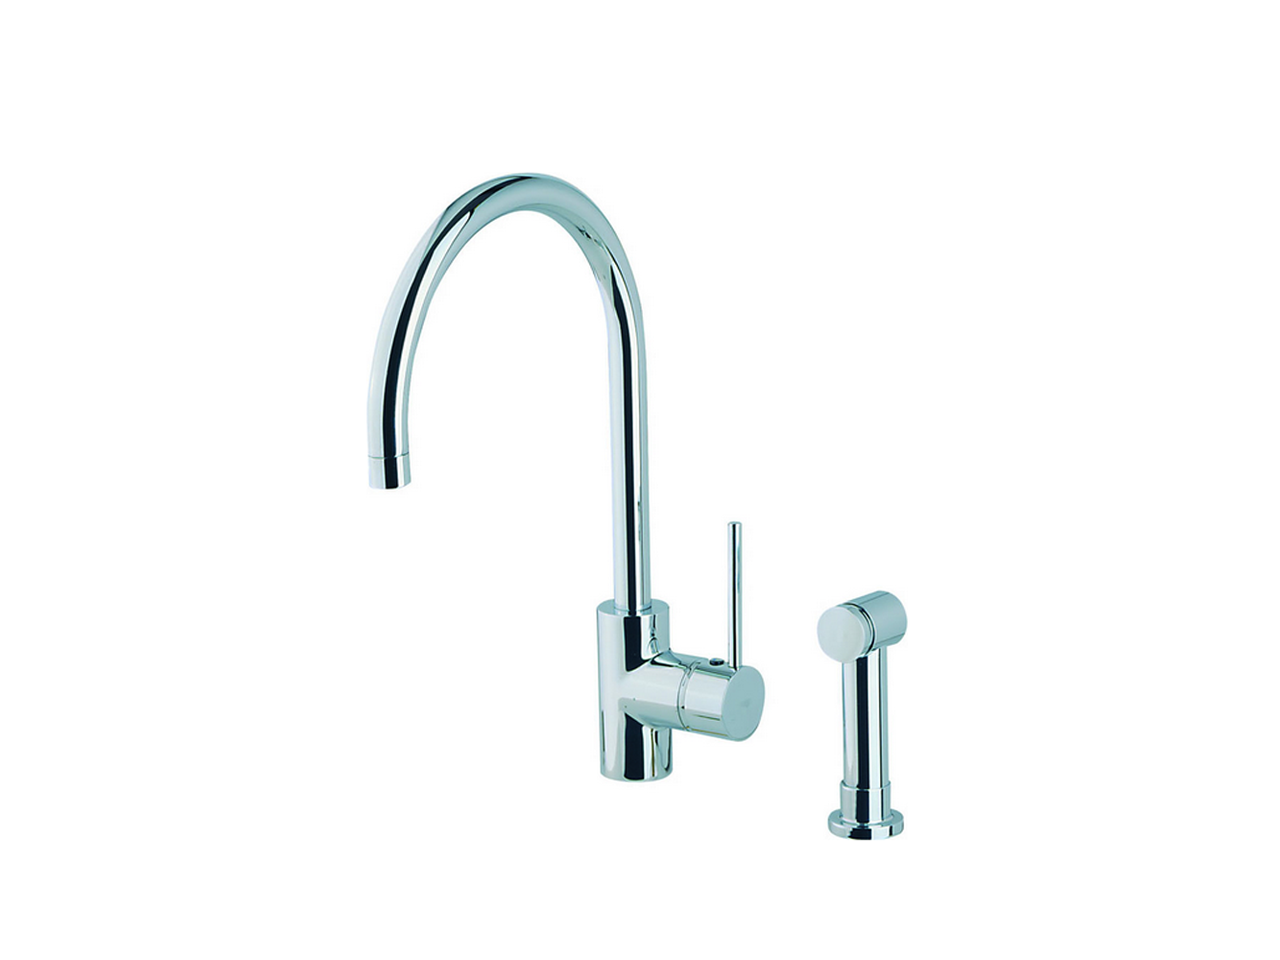 HUBERSingle lever sink mixer with pull out handspray KITCHEN